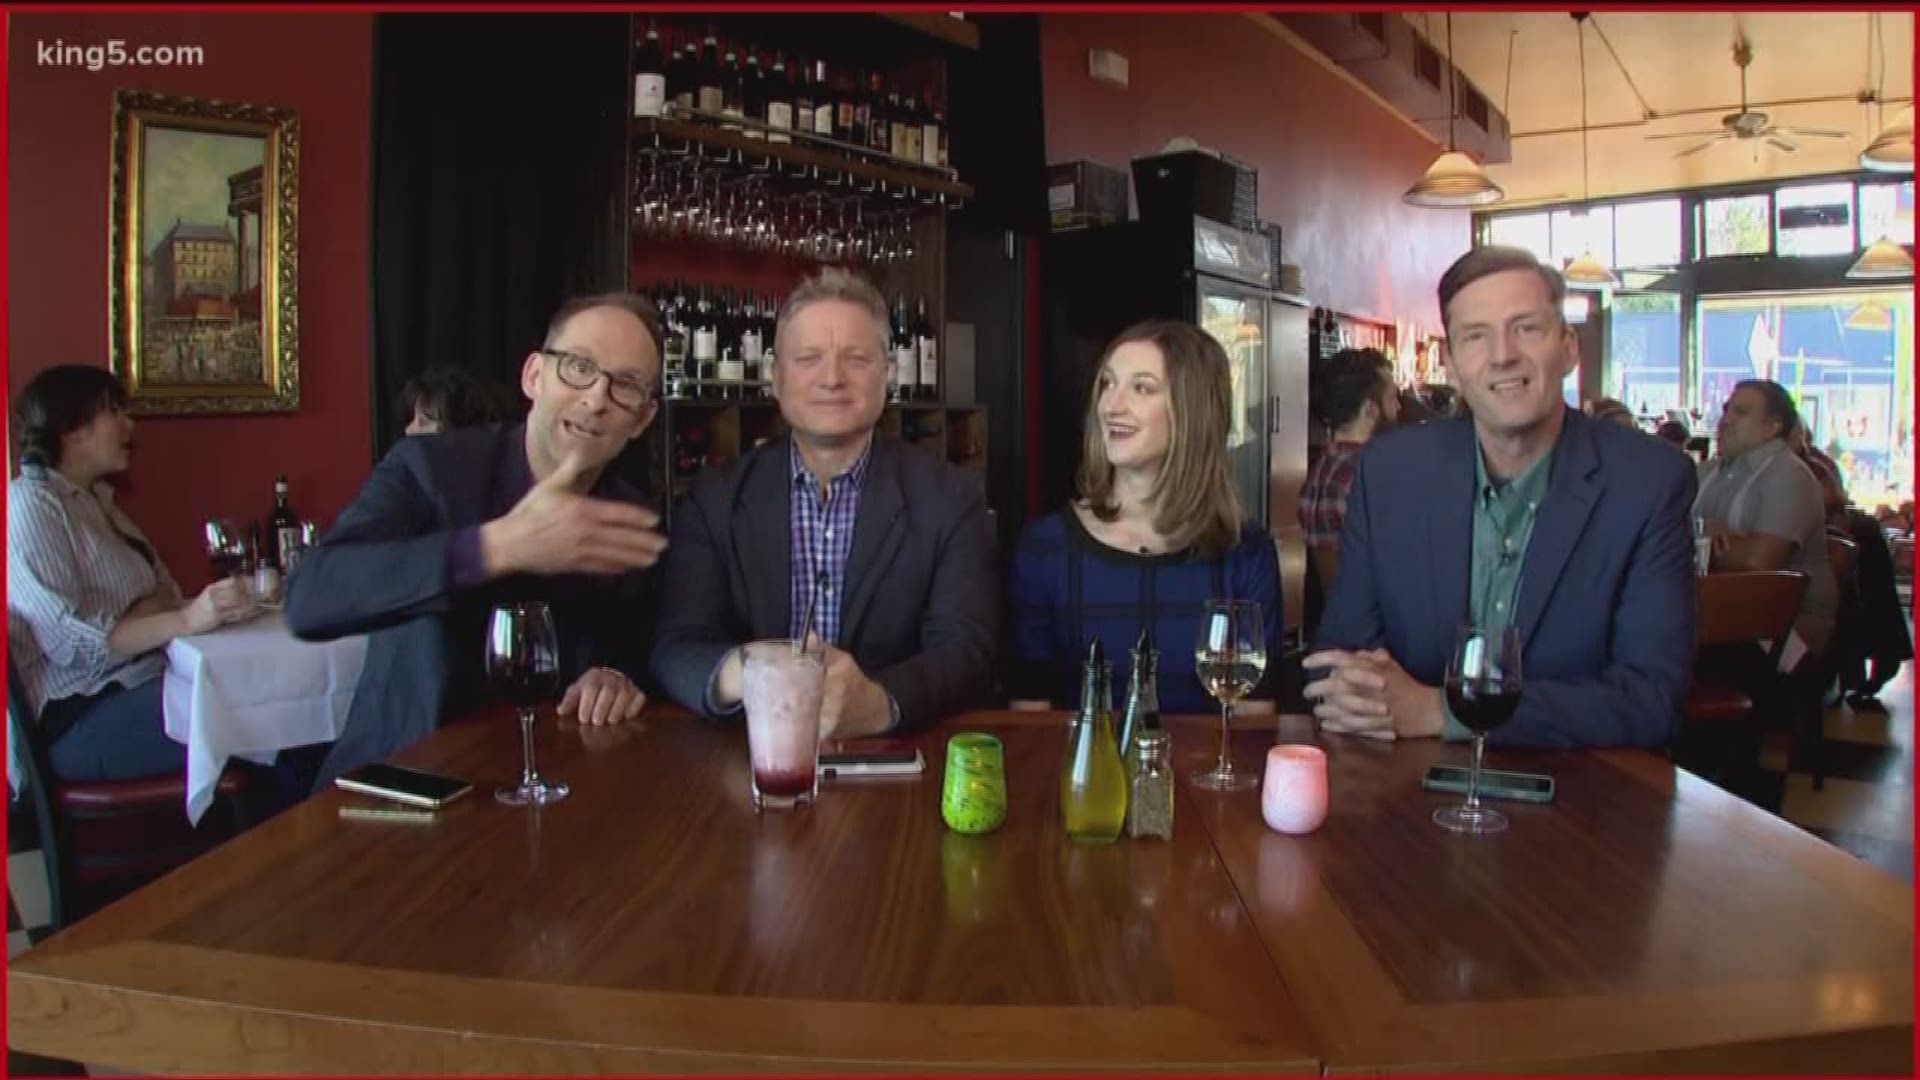 Michael, Jim, Saint and Ellen host from That's Amore in Mt. Baker. FEATURING the story behind That's Amore, Unreal Estate: Hunts Point Mansion, the Critics Choice Awards , Mandustrial salon in Tacoma, the 2019 Color of the Year: Living Coral, Concully Outhouse Races, That's a Thing: Moon Selfies, Tacoma Art Museum opens new Benaroya Wing.